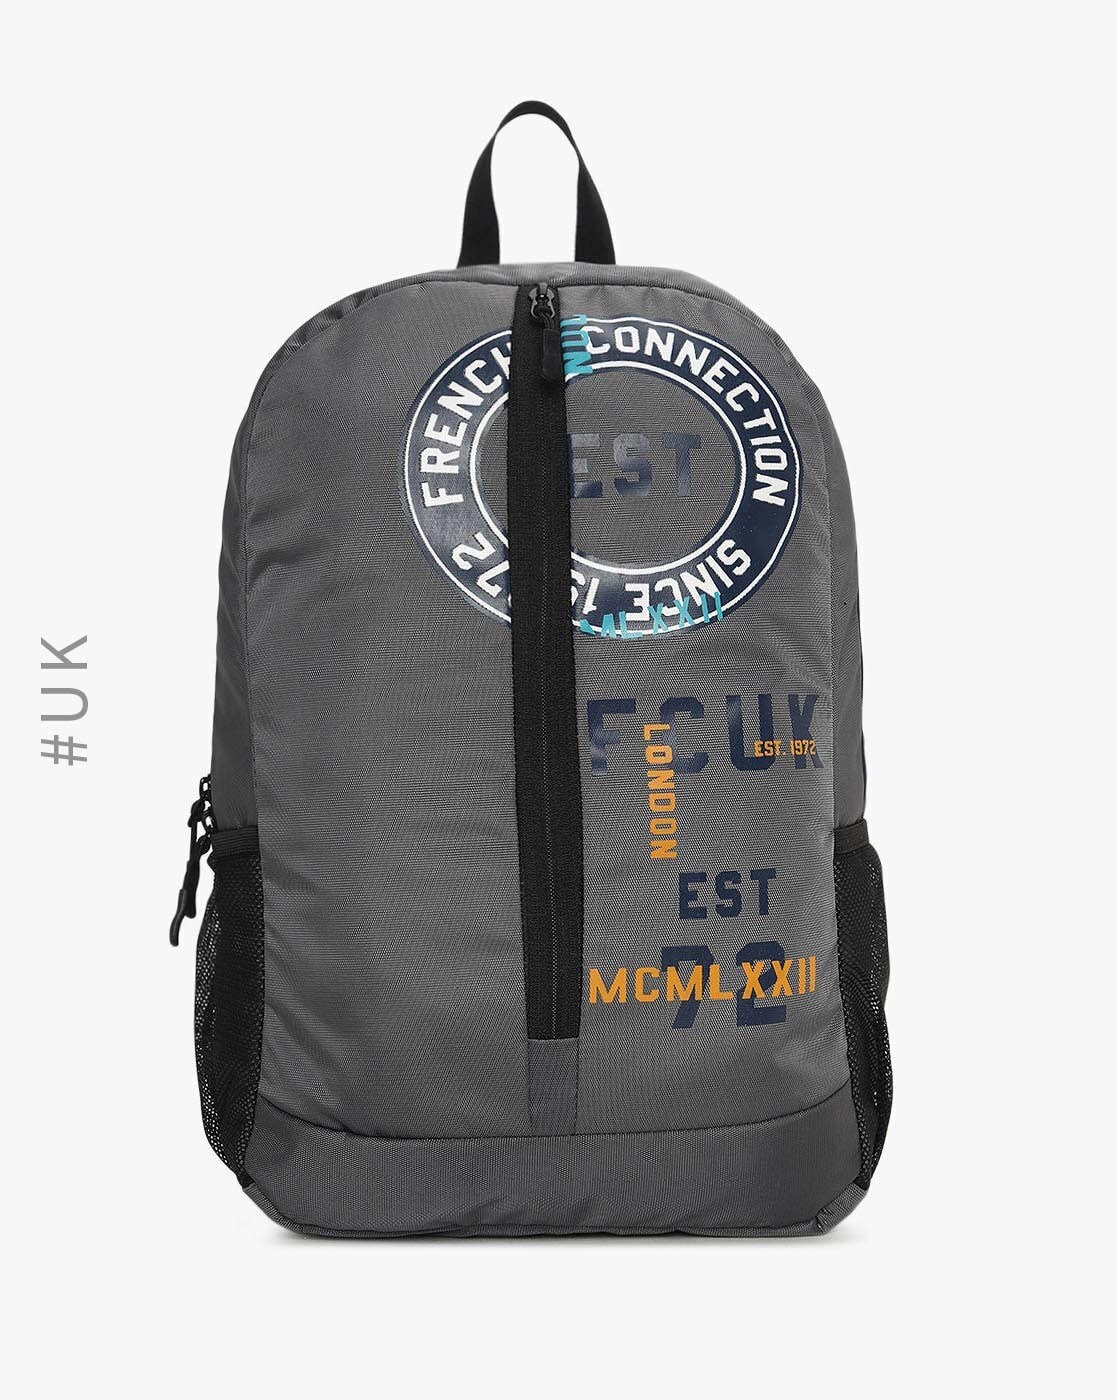 French Connection Alana Croco Backpack - Griffin Apparel